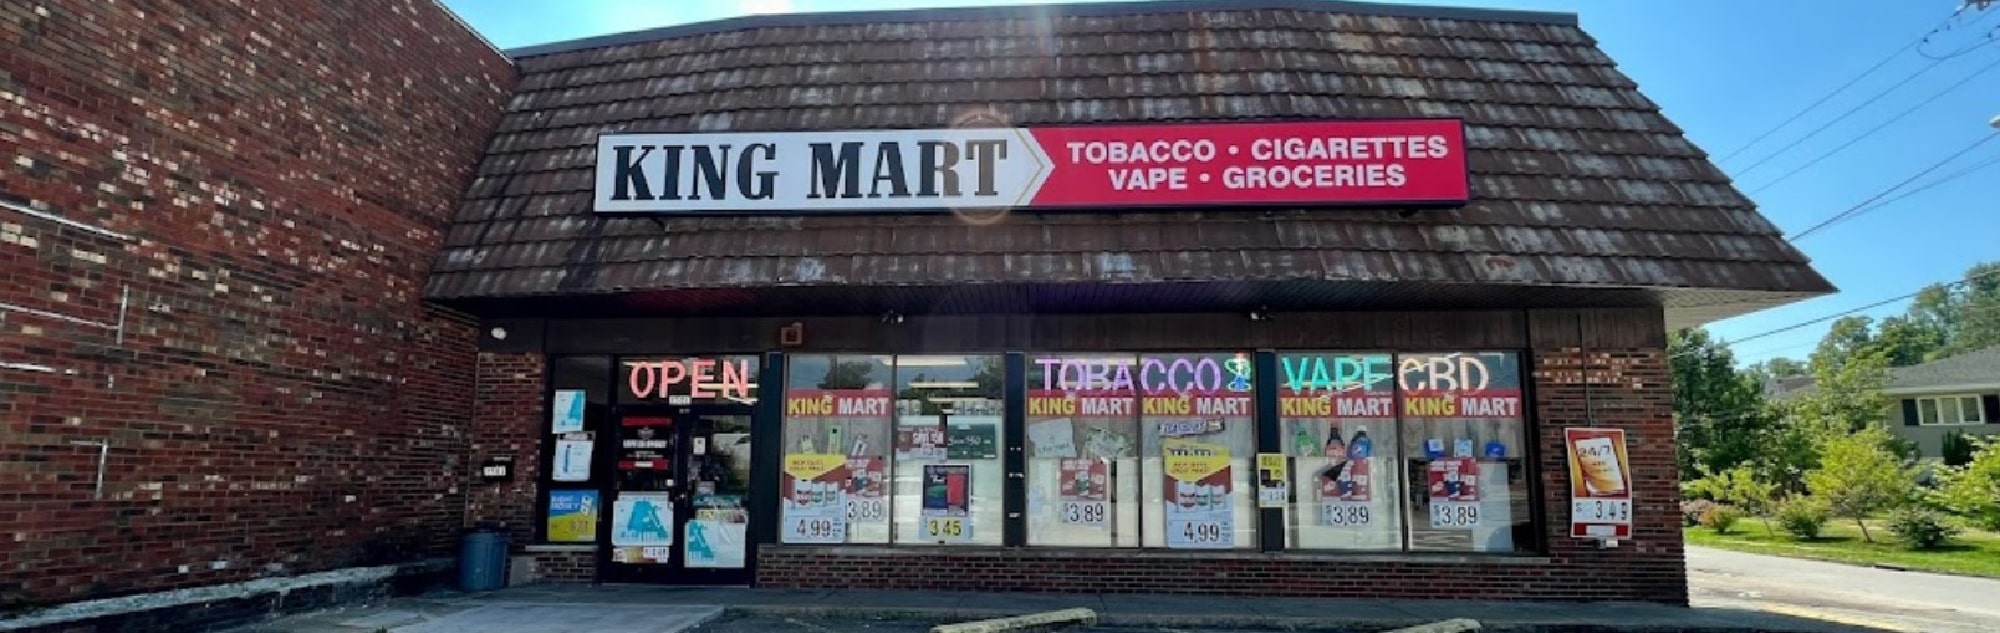 image of king mart tobacco and vape in huntington wv